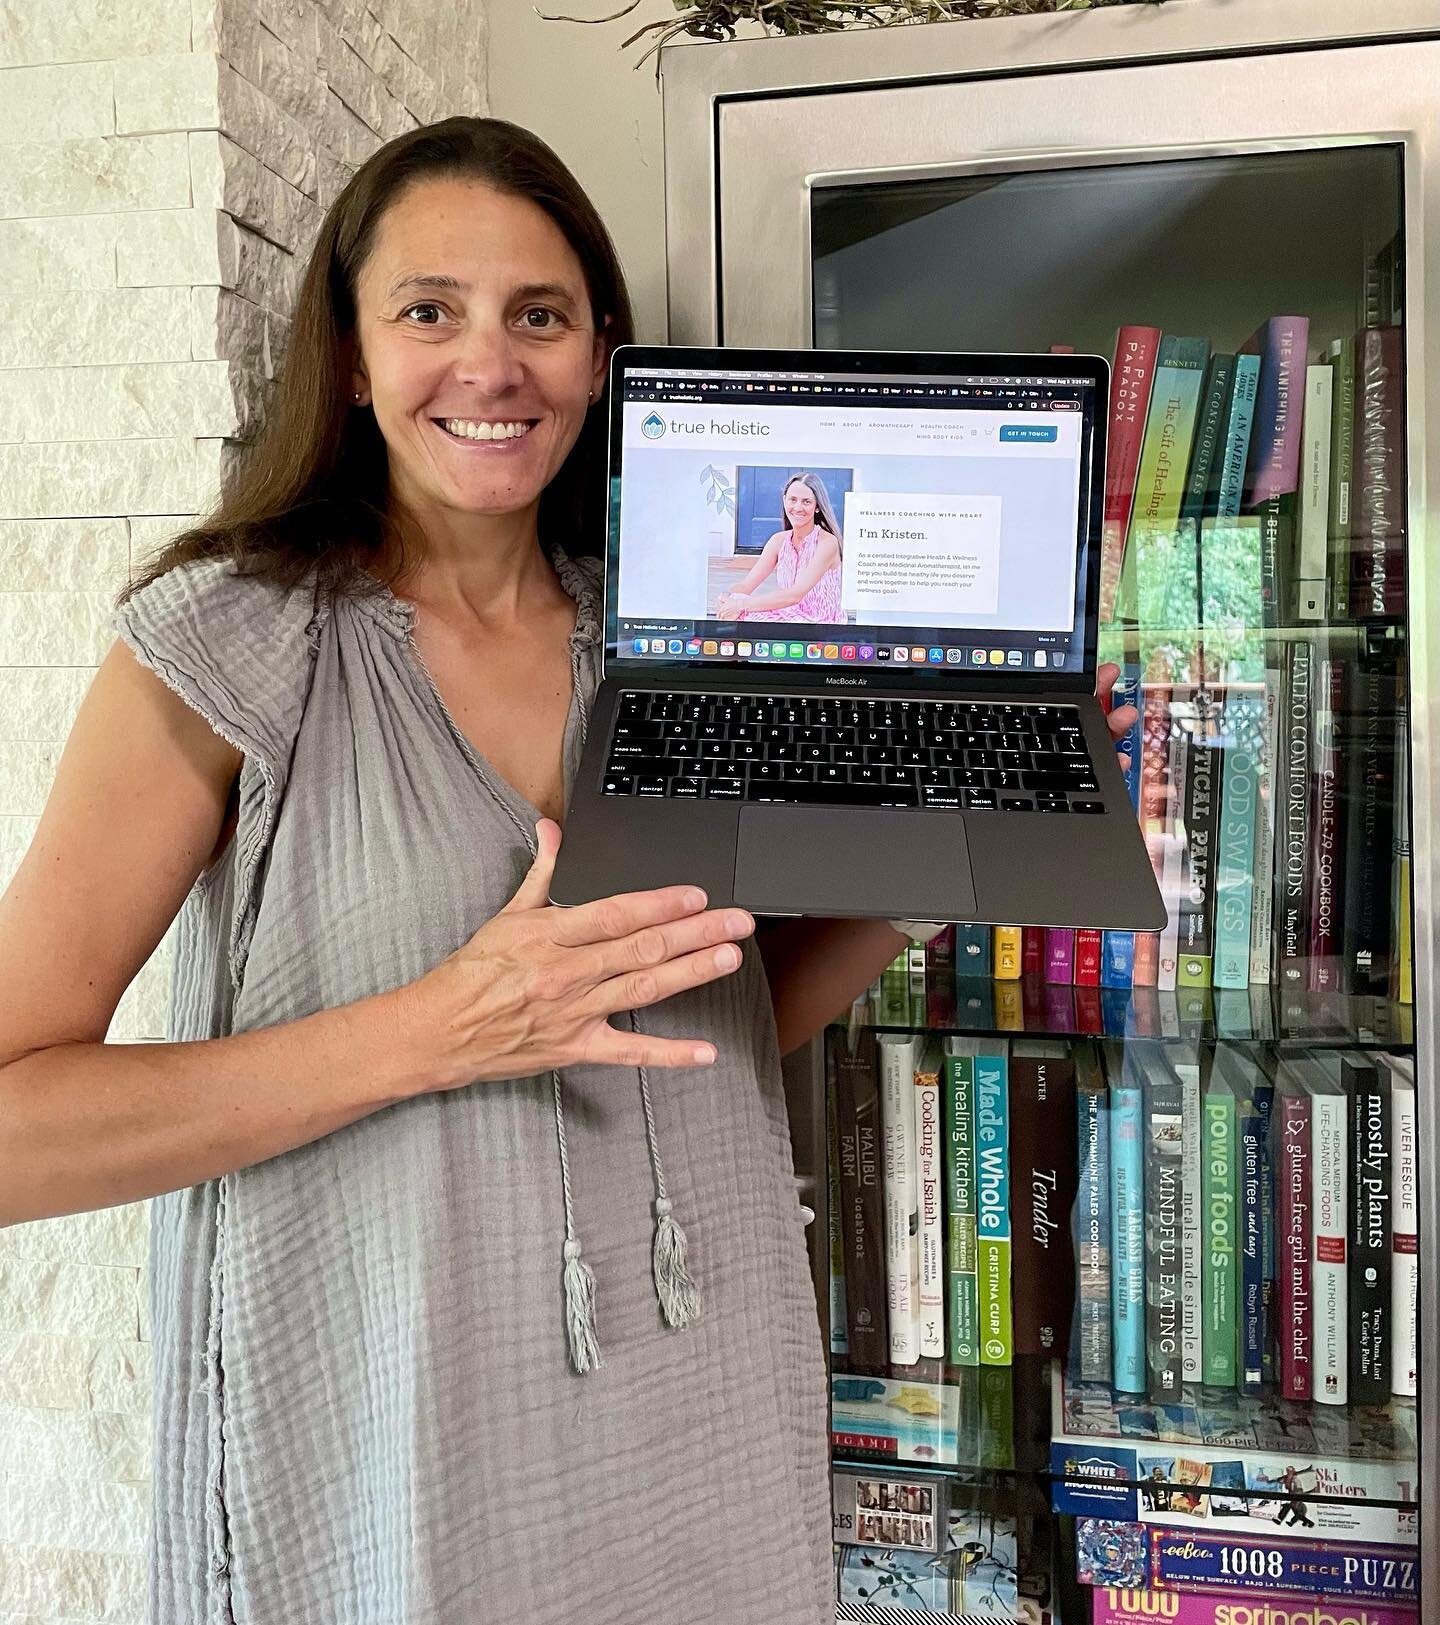 I am buzzing with excitement that the official launch of my business True Holistic is tomorrow! 🥳🎉

Been hard at work rebranding my health coaching/ aromatherapy business and am thrilled to have a new website and landing page for all things True Ho